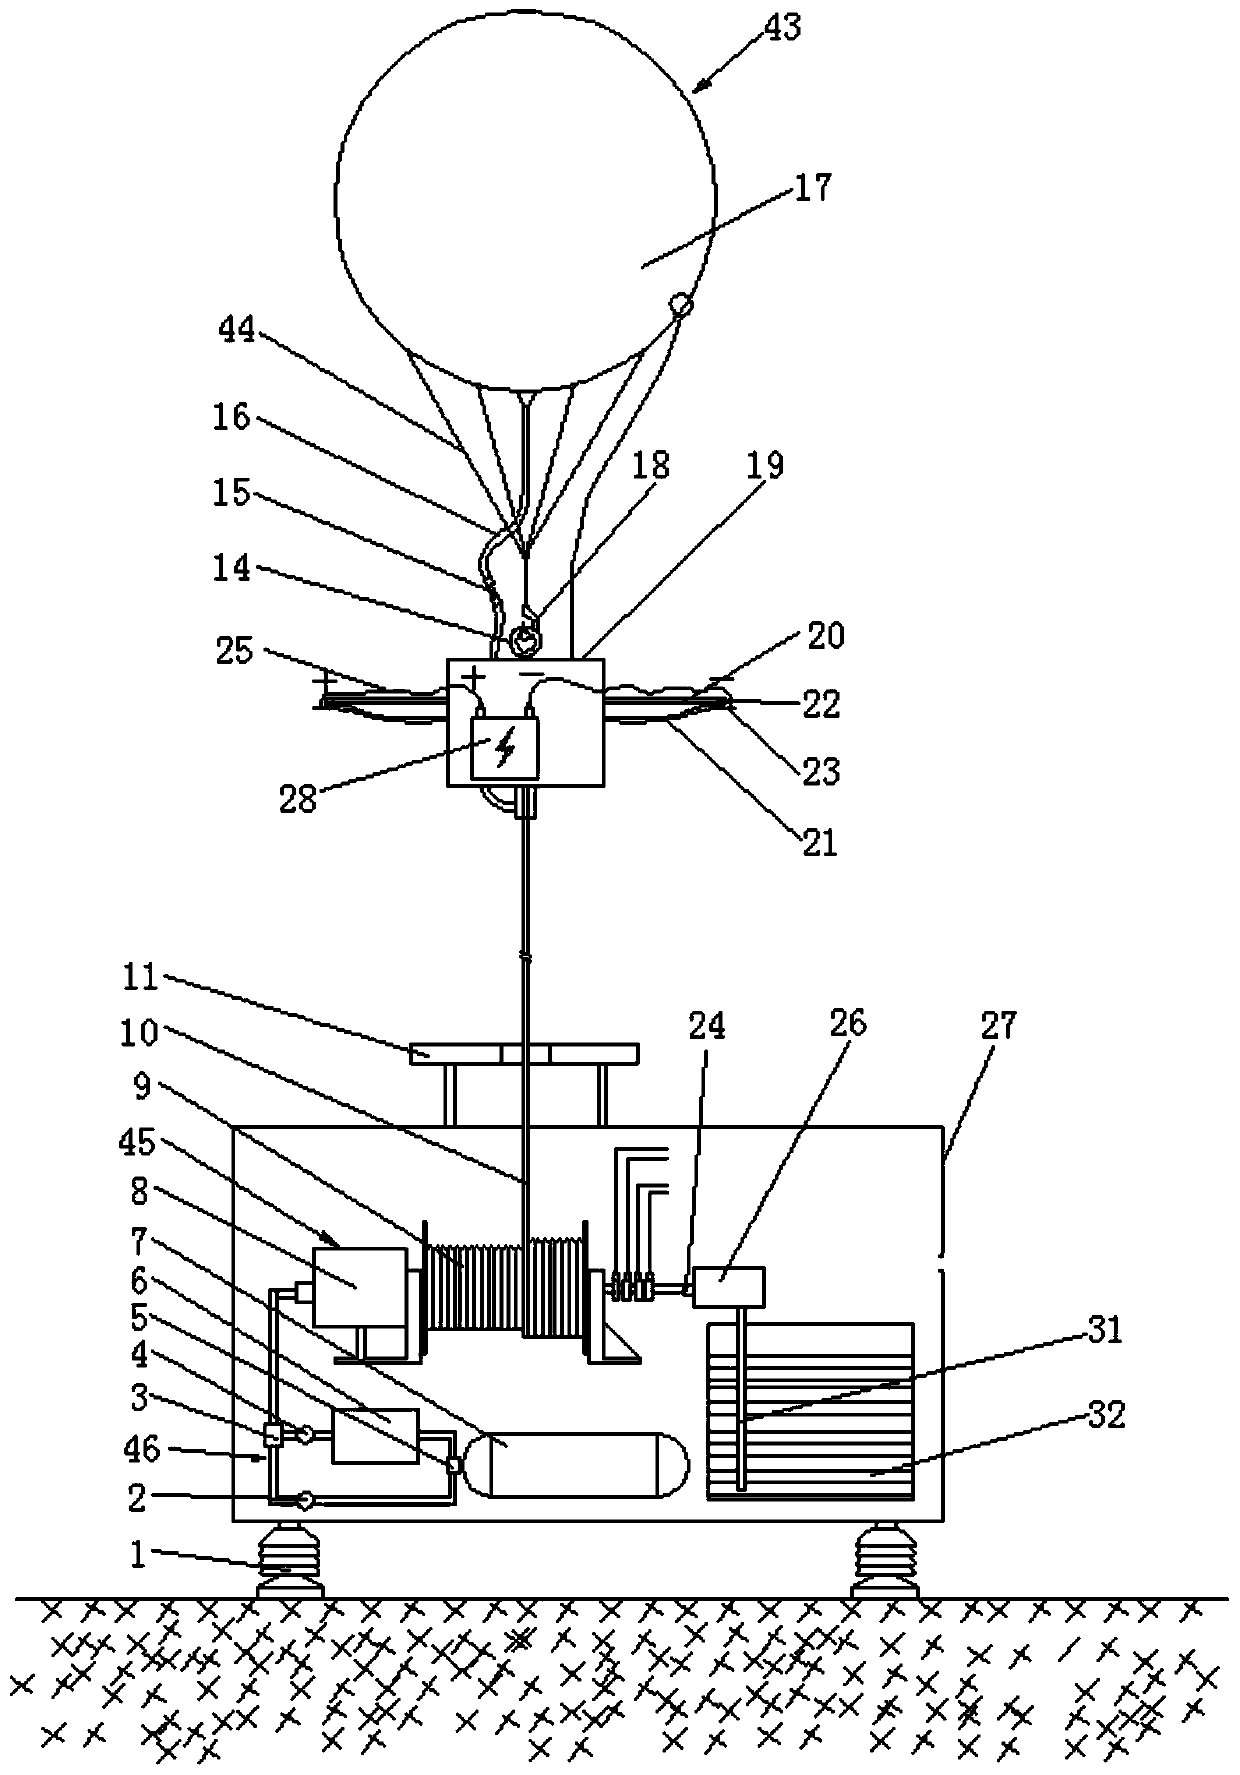 Haze removal device and method for spraying charged water at high altitude